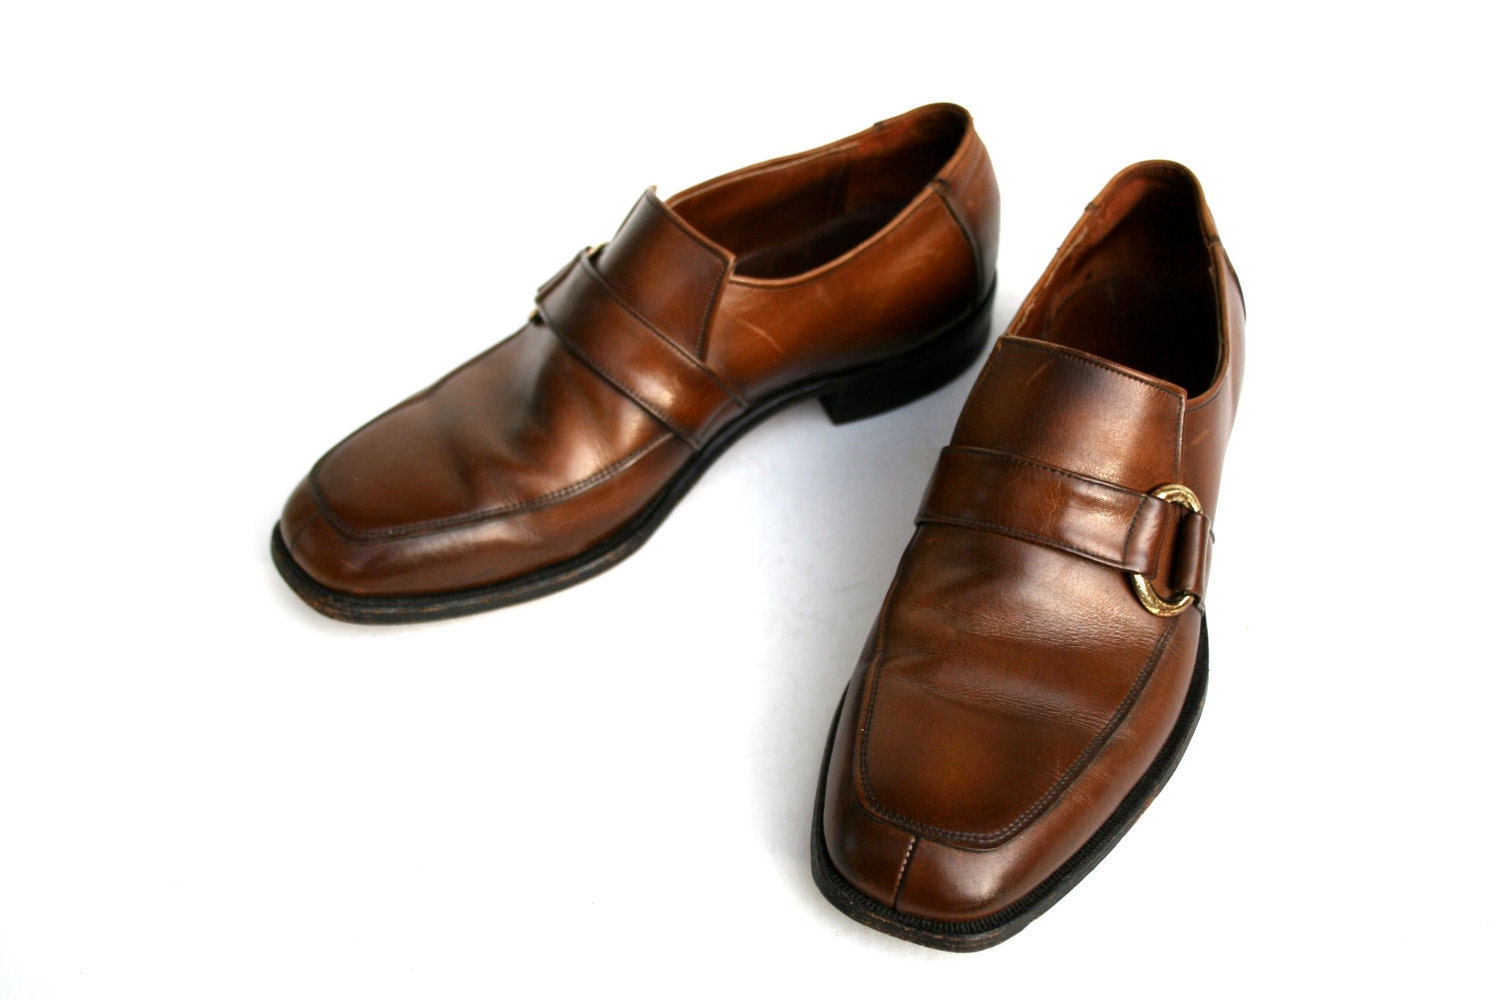 Vintage Mens Shoes Brown Buckle 1970s Mens 8 by xoUda on Etsy